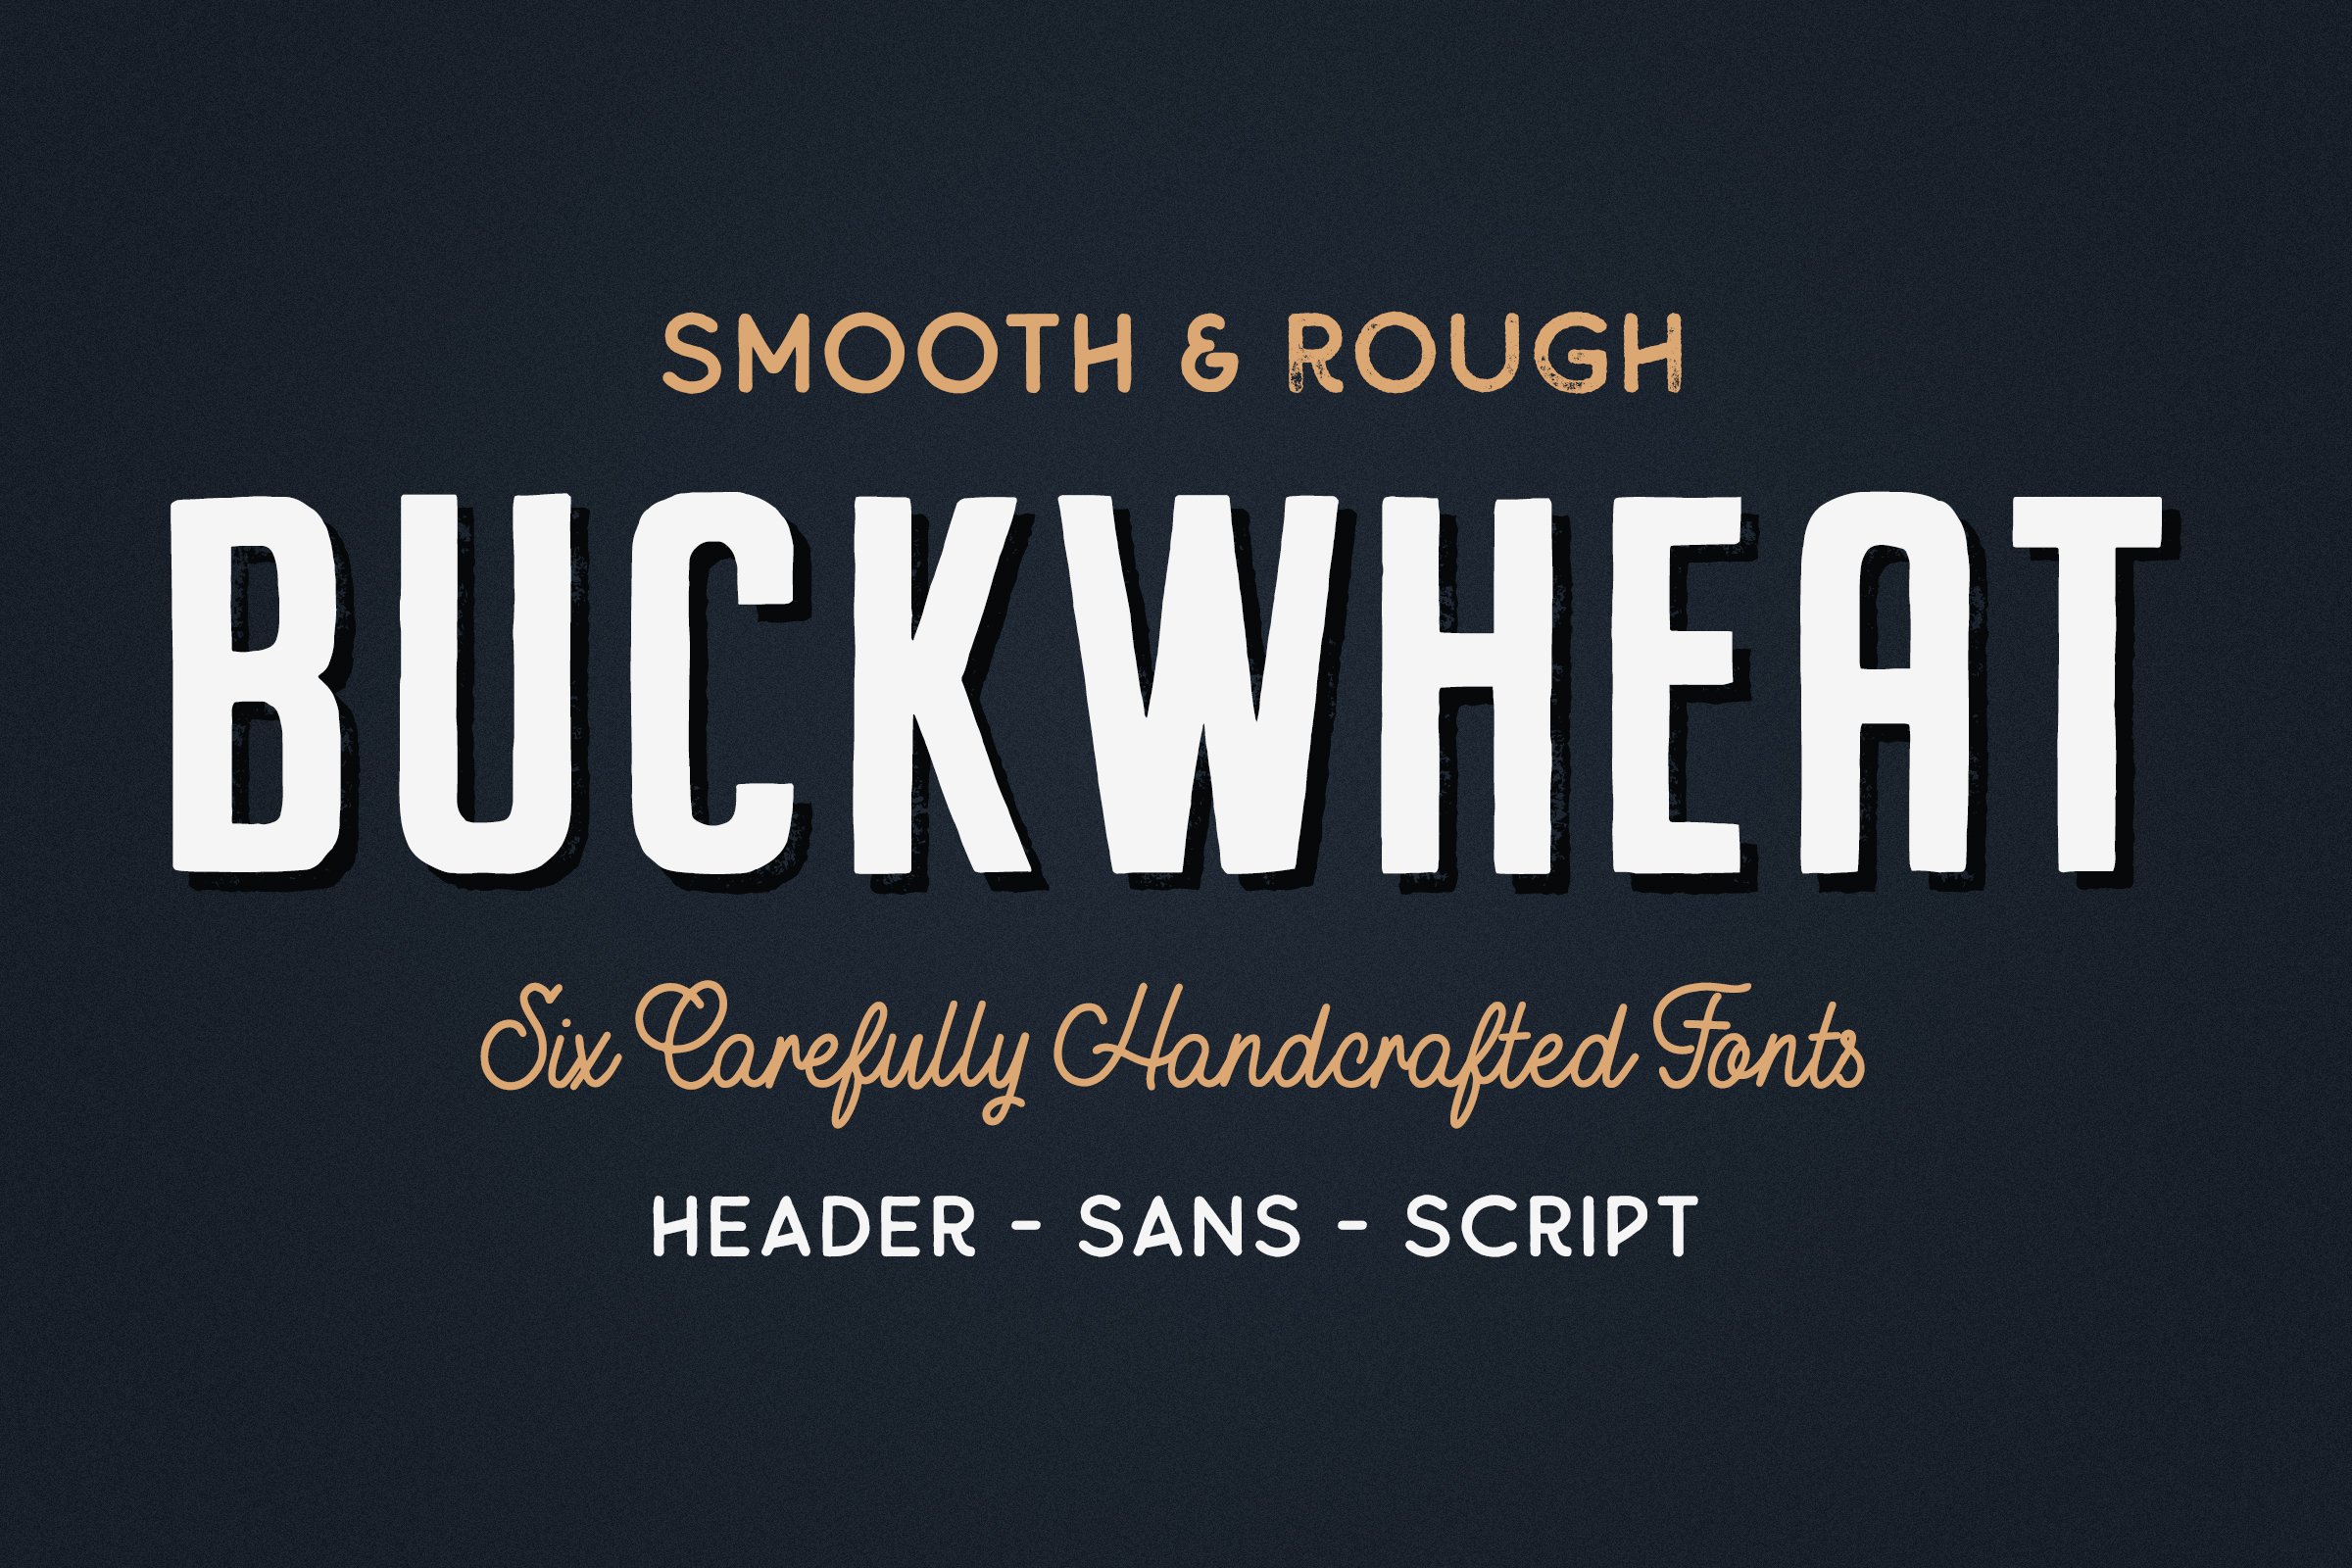 Buckwheat Font Collection cover image.